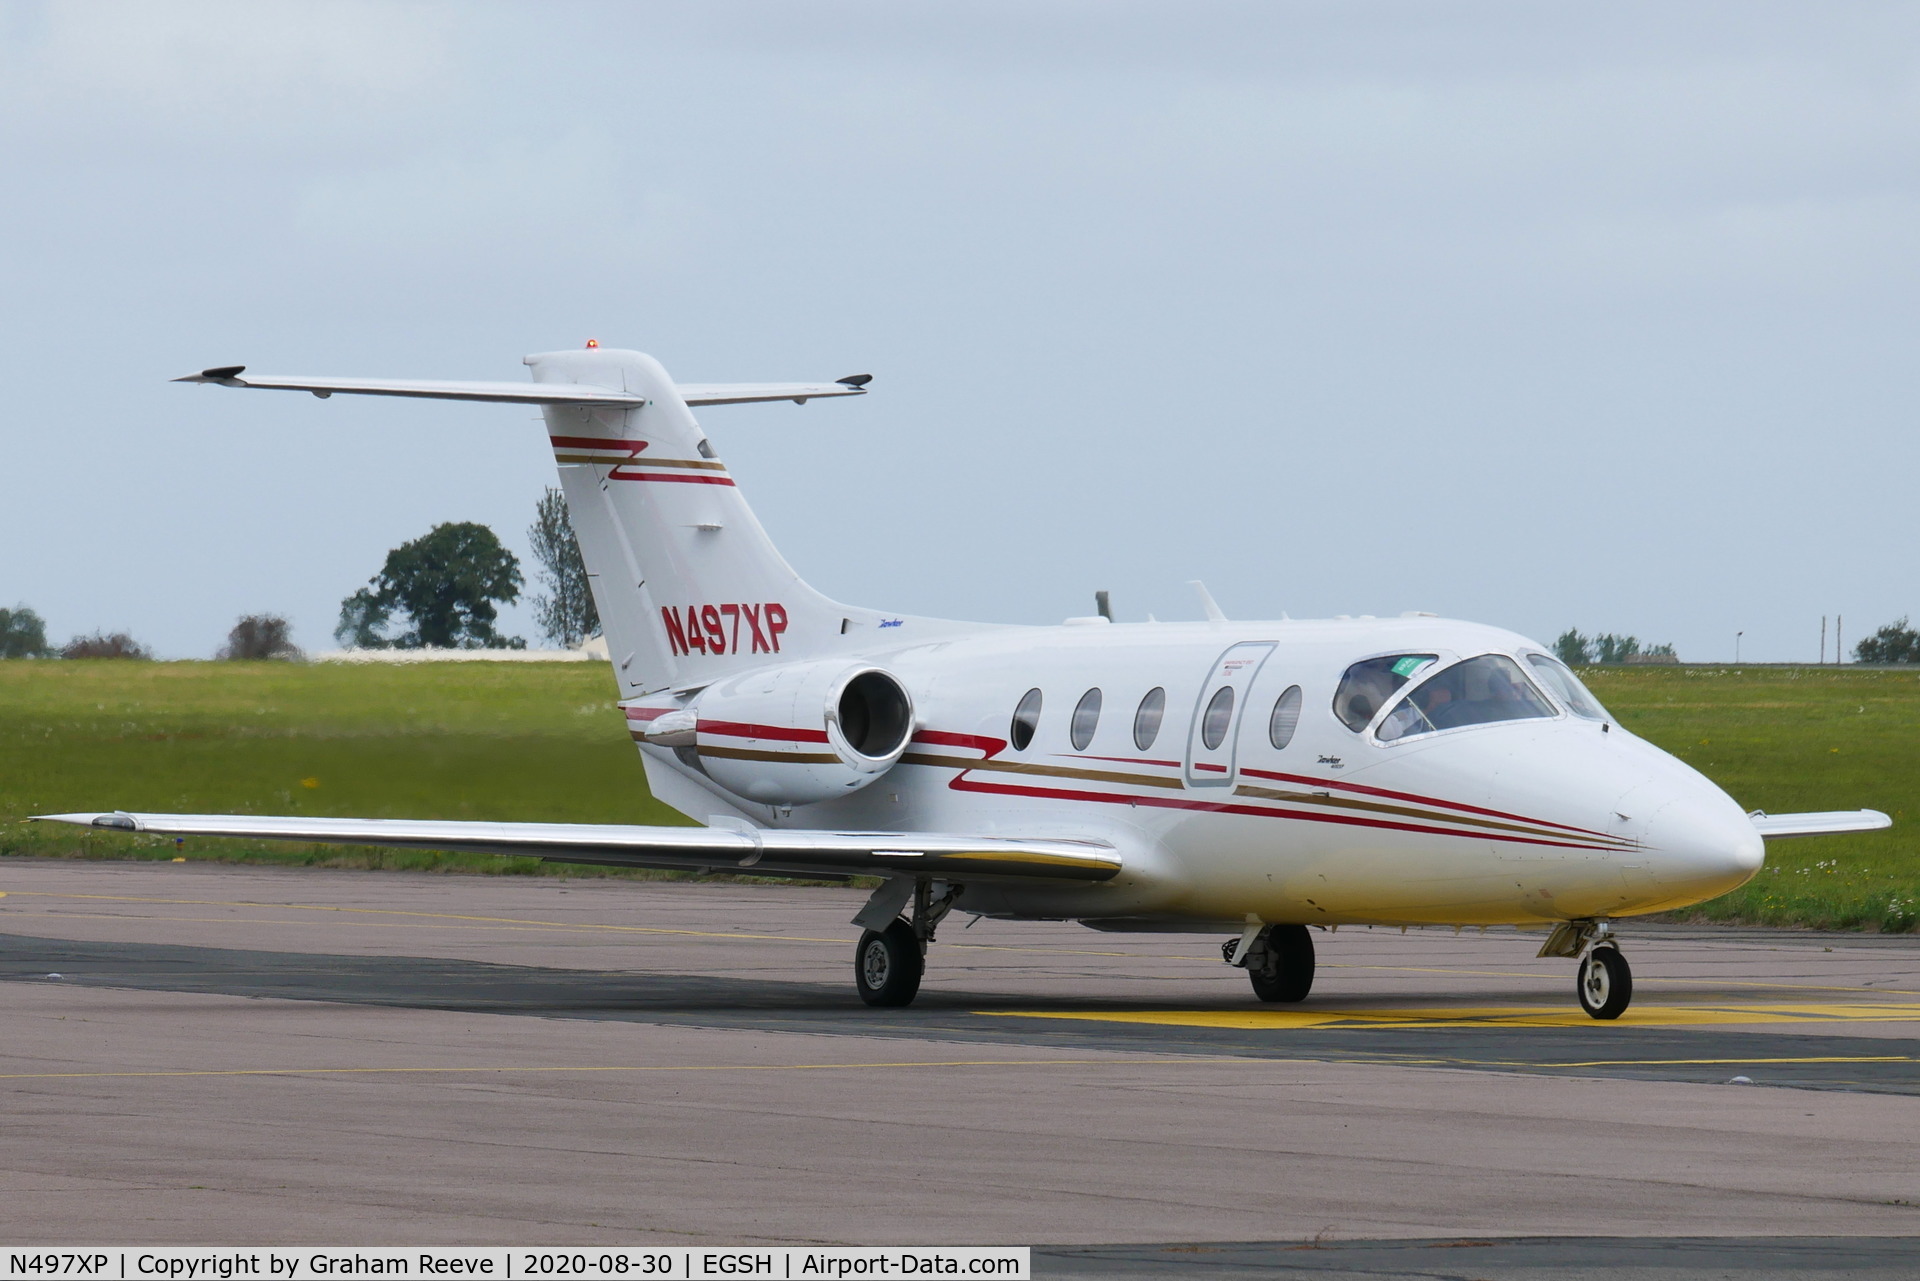 N497XP, 2006 Raytheon 400A BeechJet C/N RK-497, Departing from Norwich.